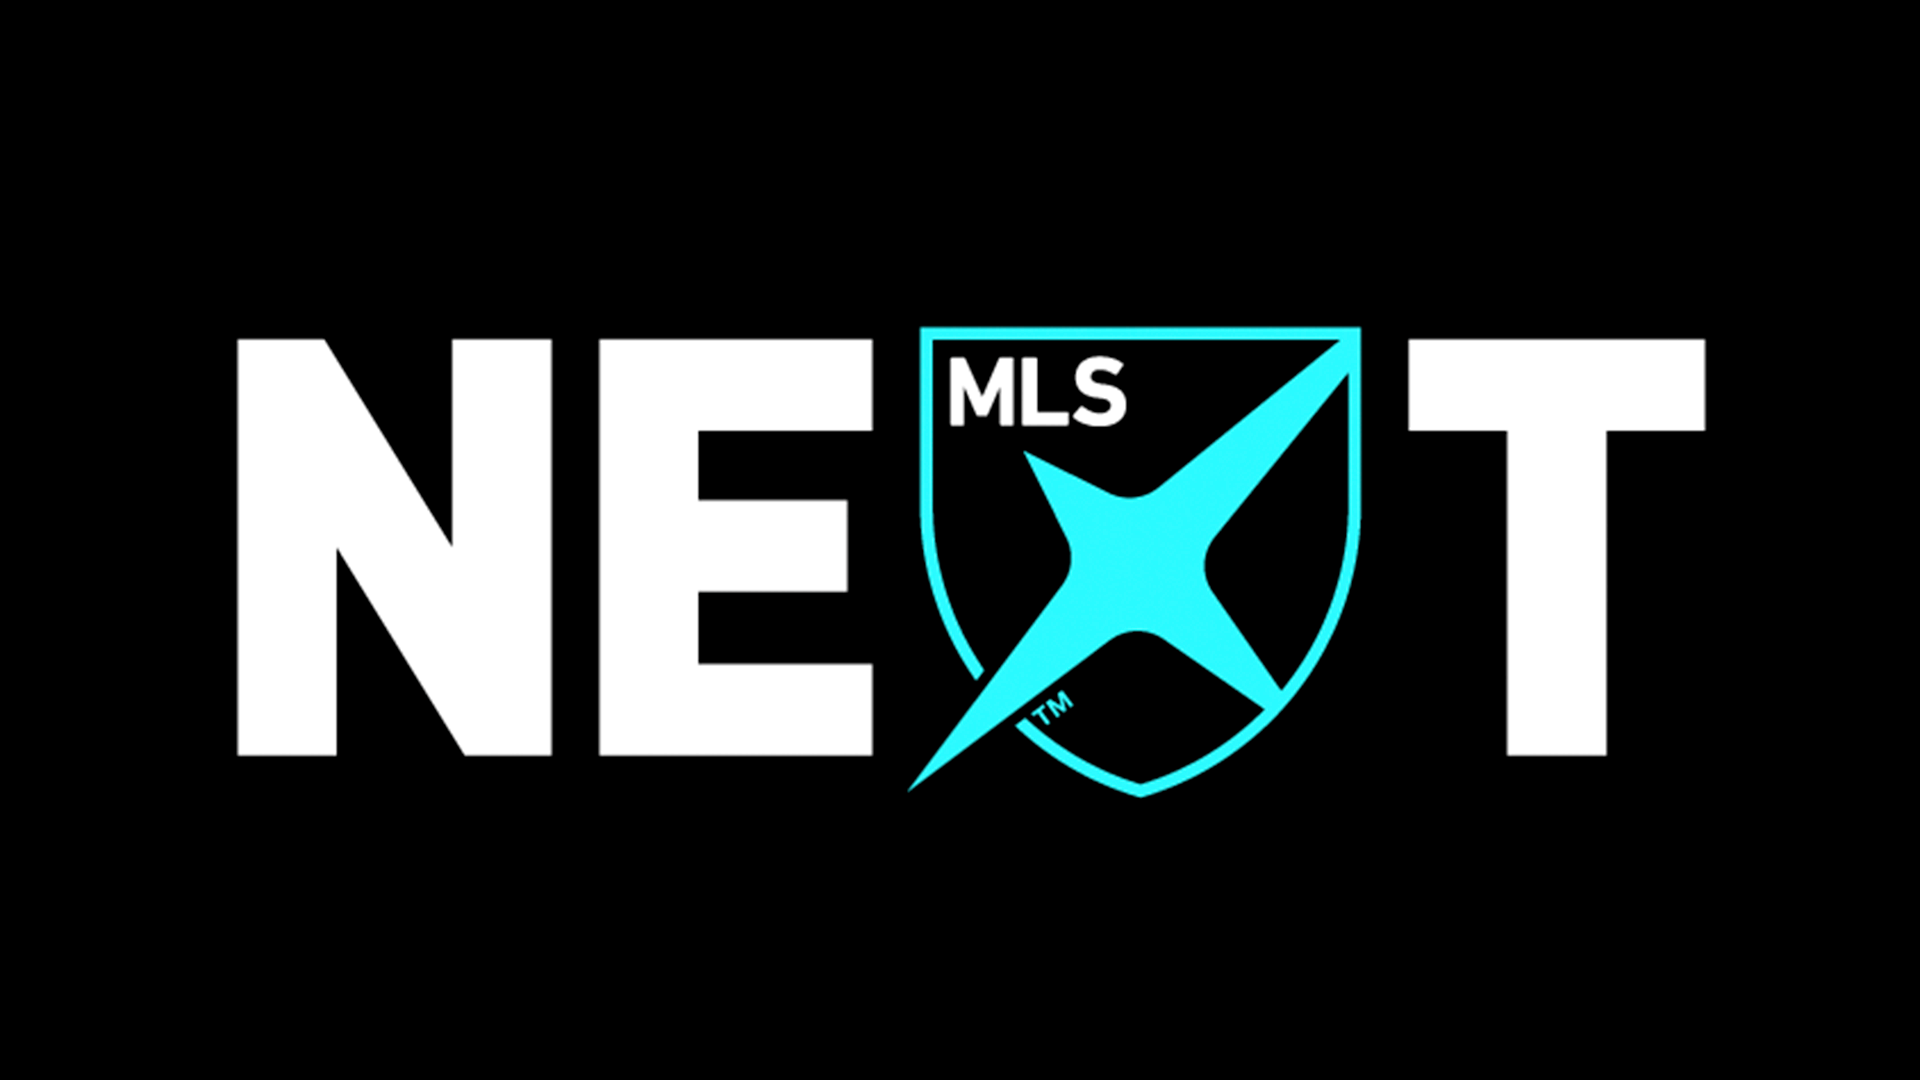 Inaugural MLS NEXT Cup Playoffs coming to Dallas in late June